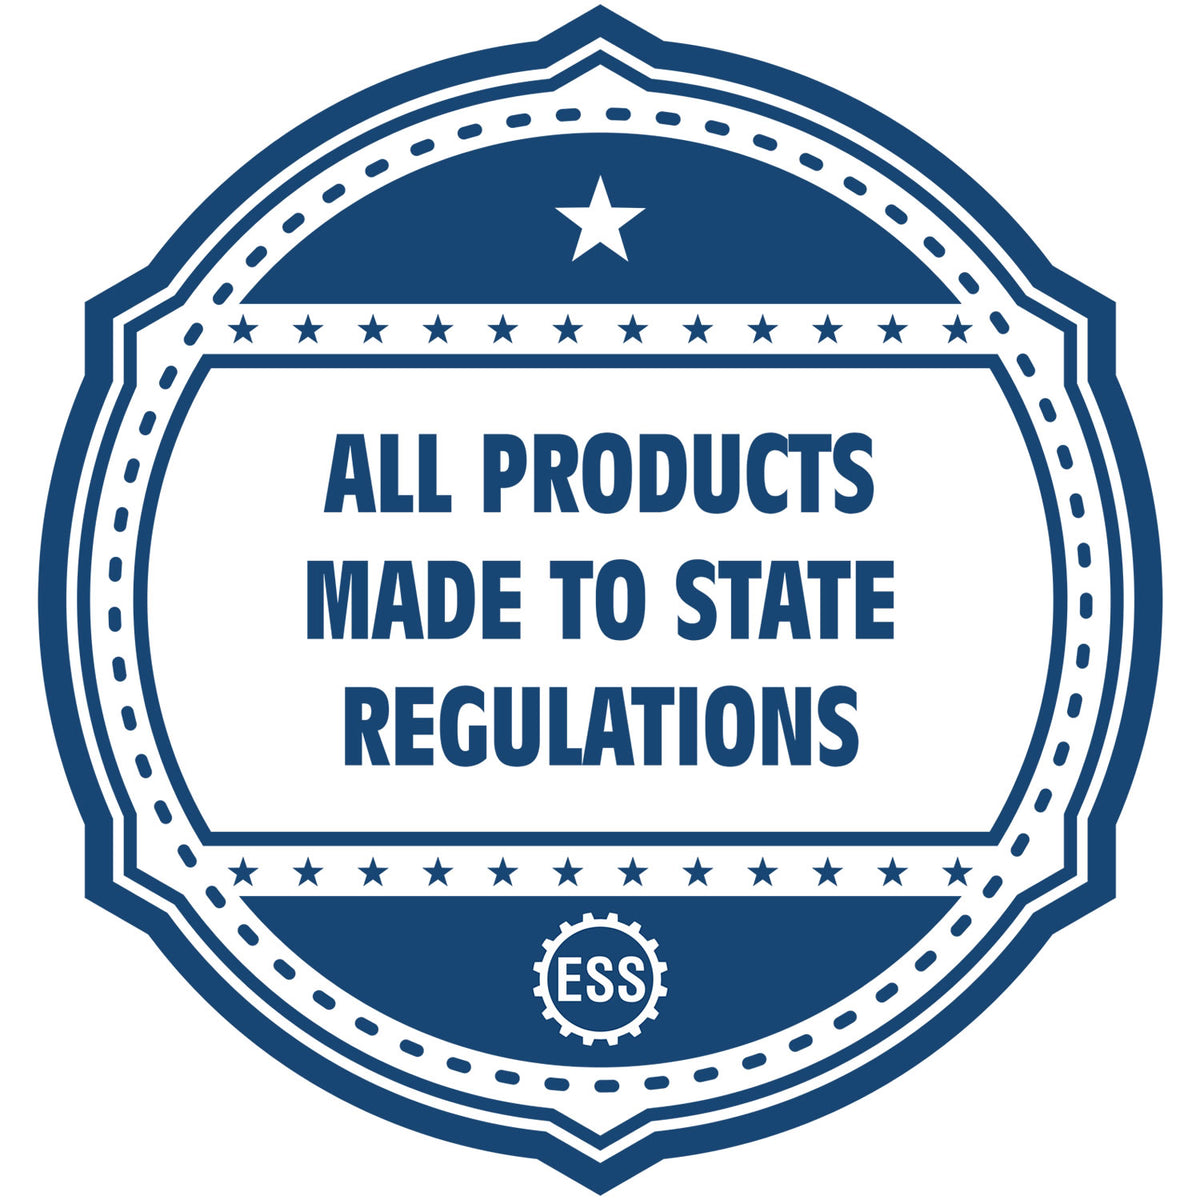 An icon or badge element for the Slim Pre-Inked Rectangular Notary Stamp for Rhode Island showing that this product is made in compliance with state regulations.